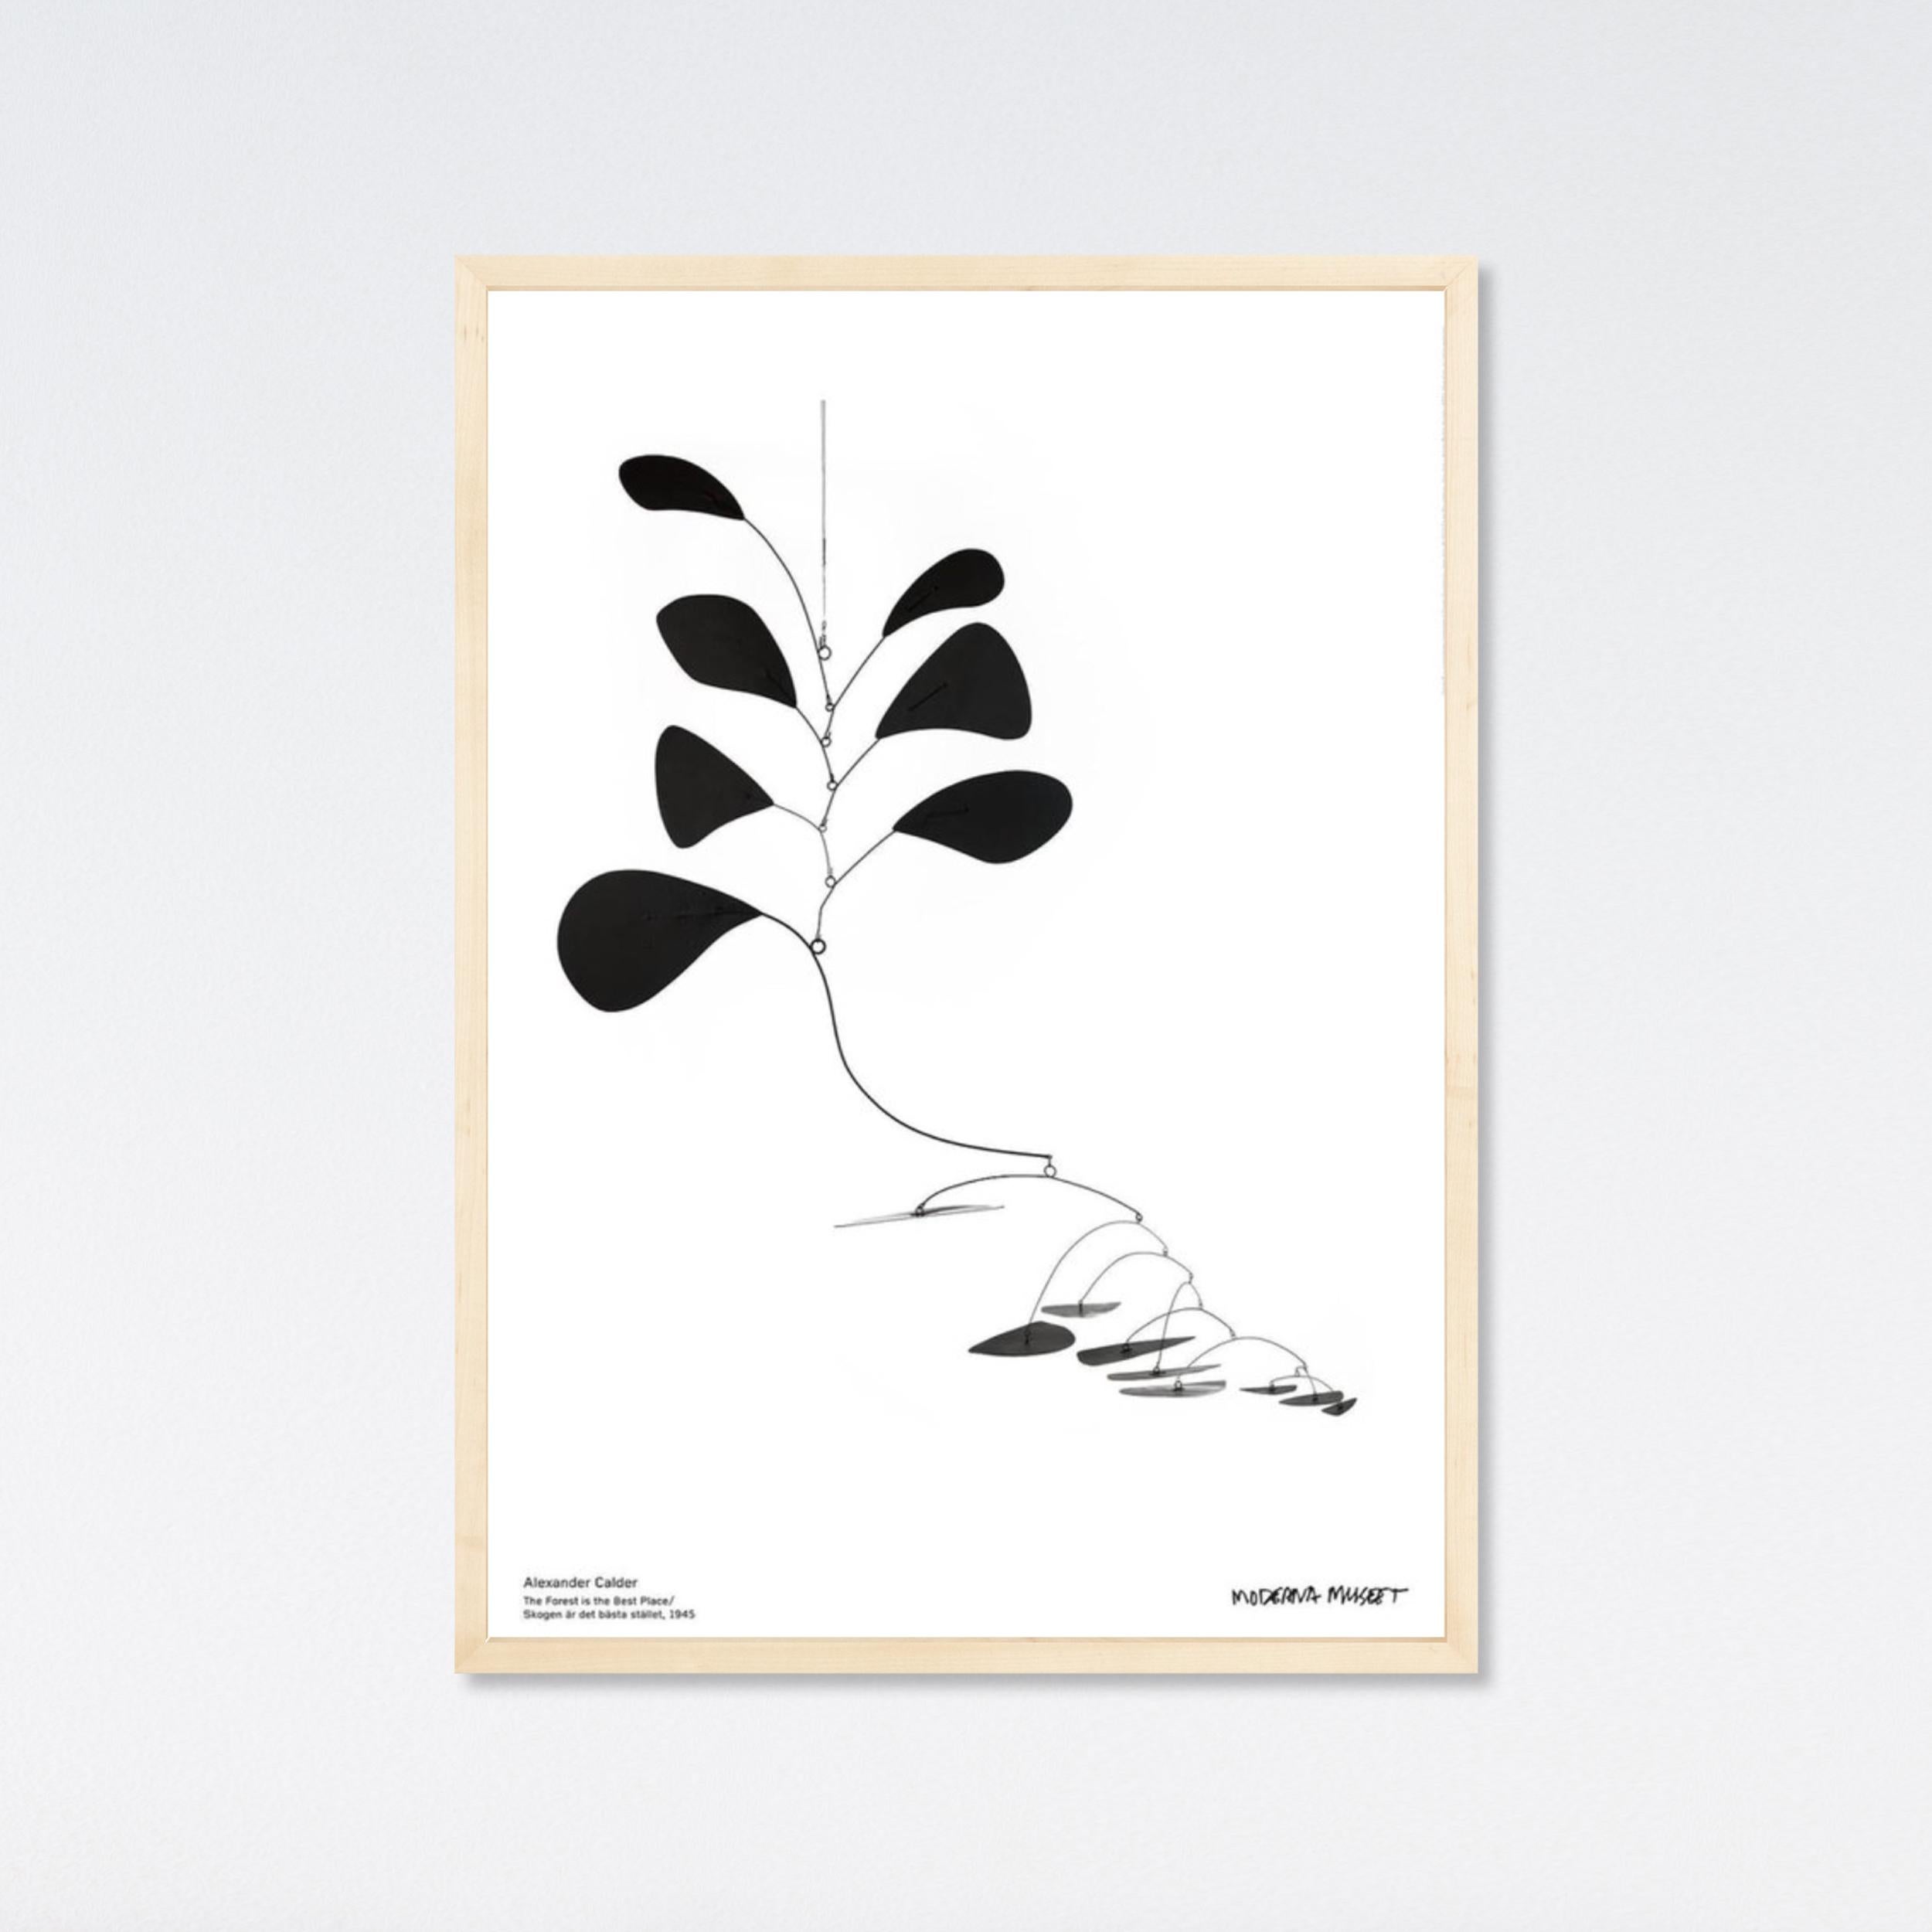 Alexander Calder, The Forest is the Best Place, 2007 Museum Poster, minimalist For Sale 1